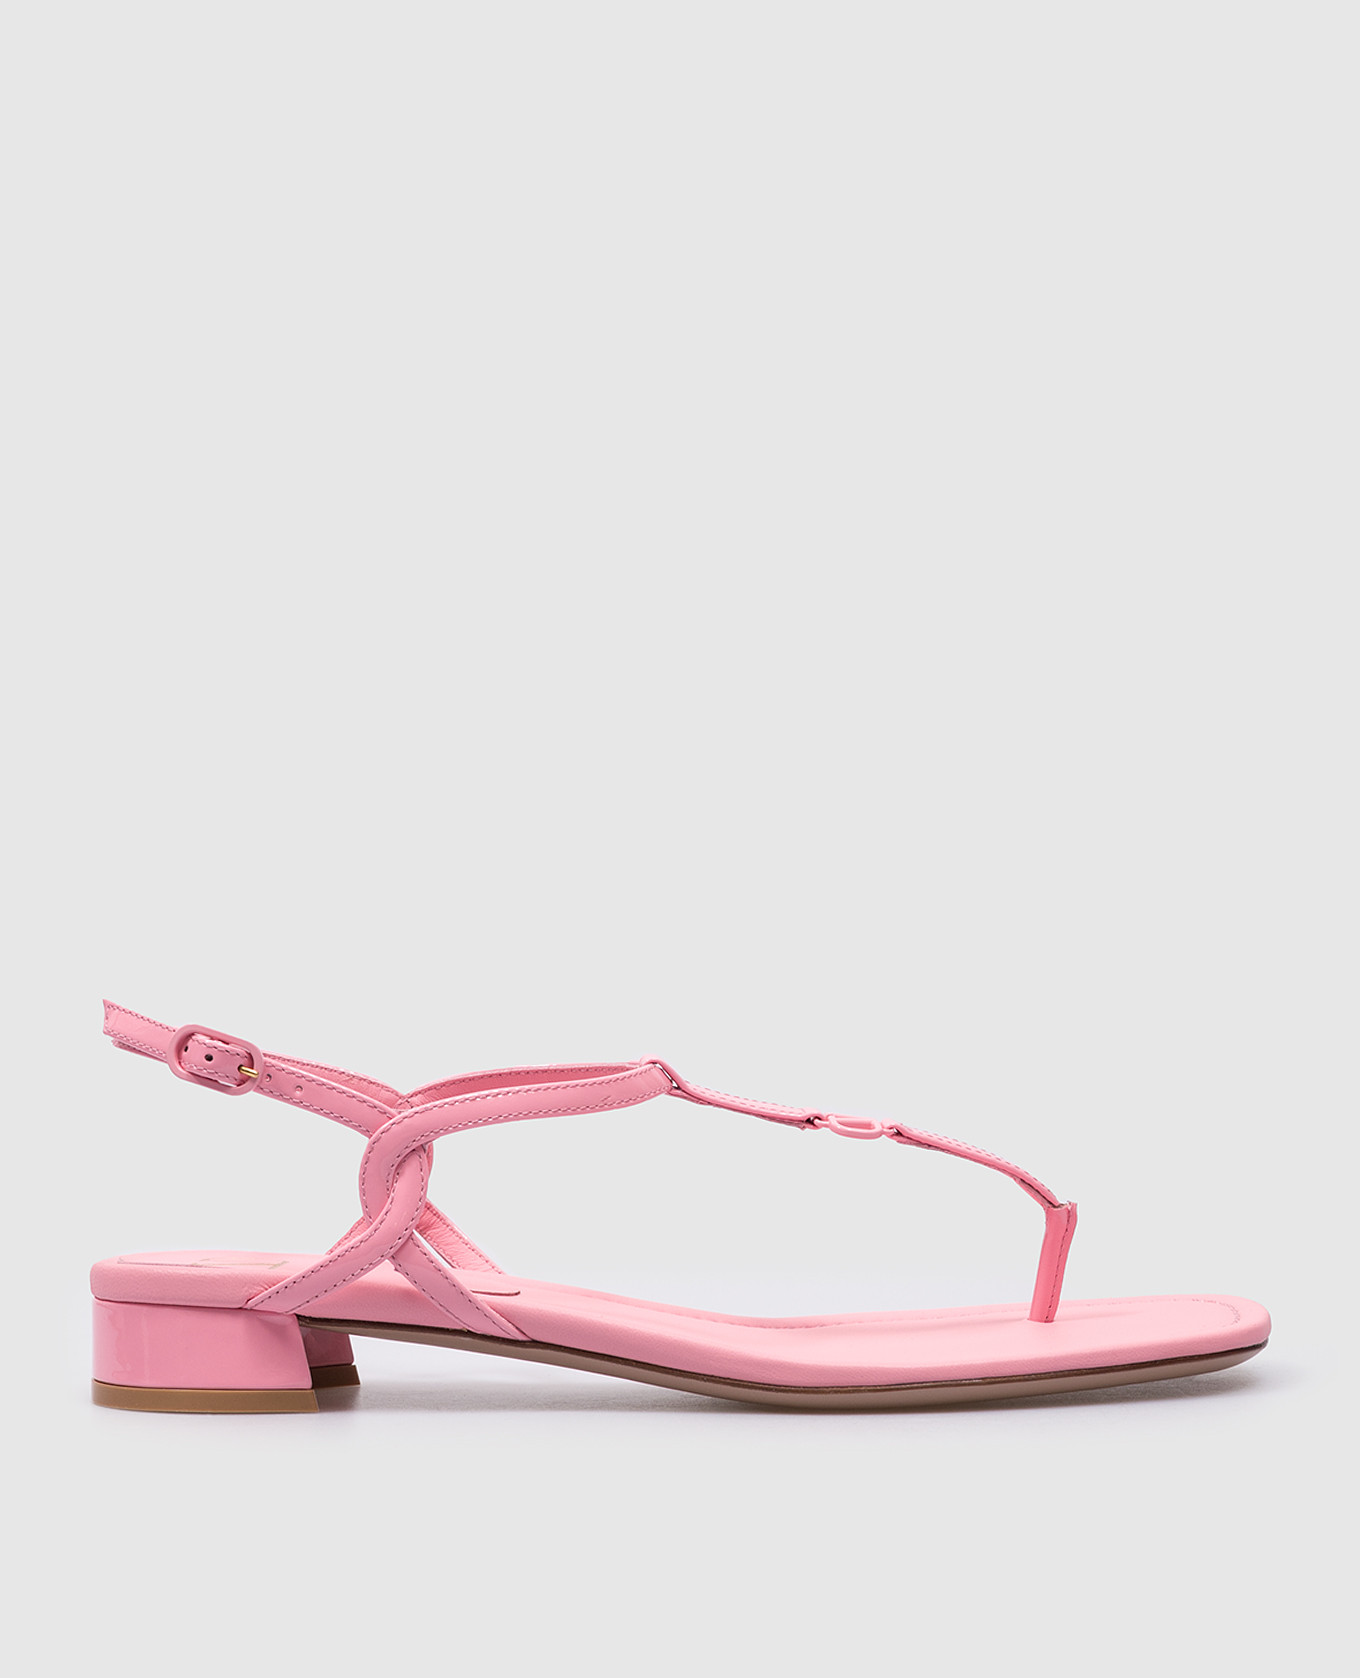 Pink patent leather sandals with VLogo Signature logo